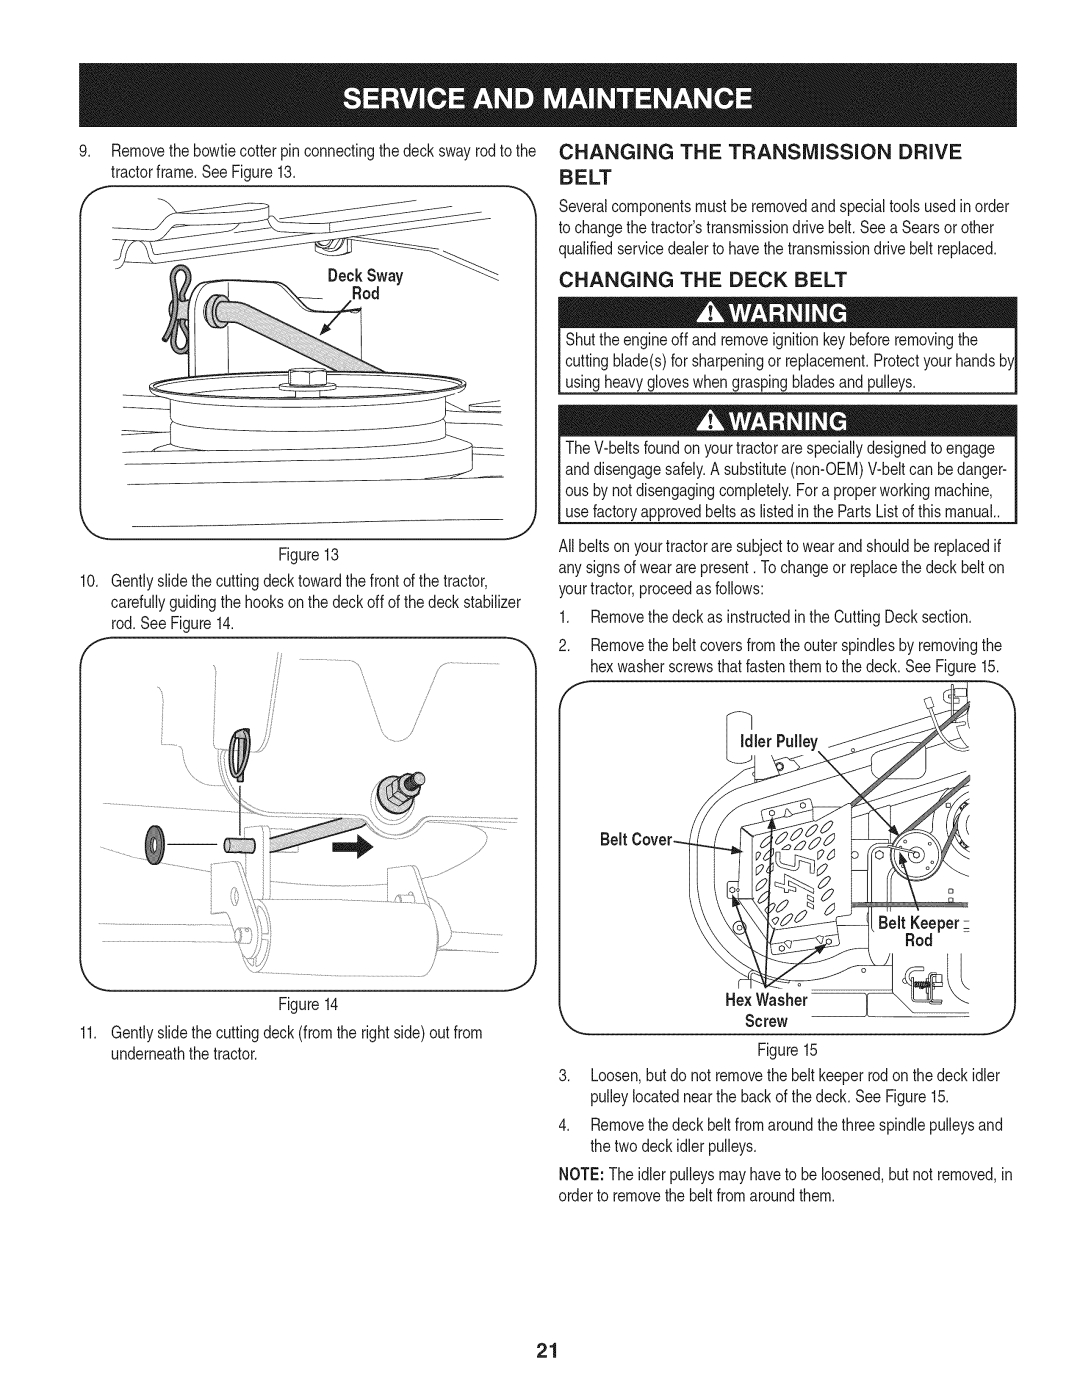 Craftsman 247.28984, PGT9000 manual Changing The Transmission Drive, Changing The Deck Belt 